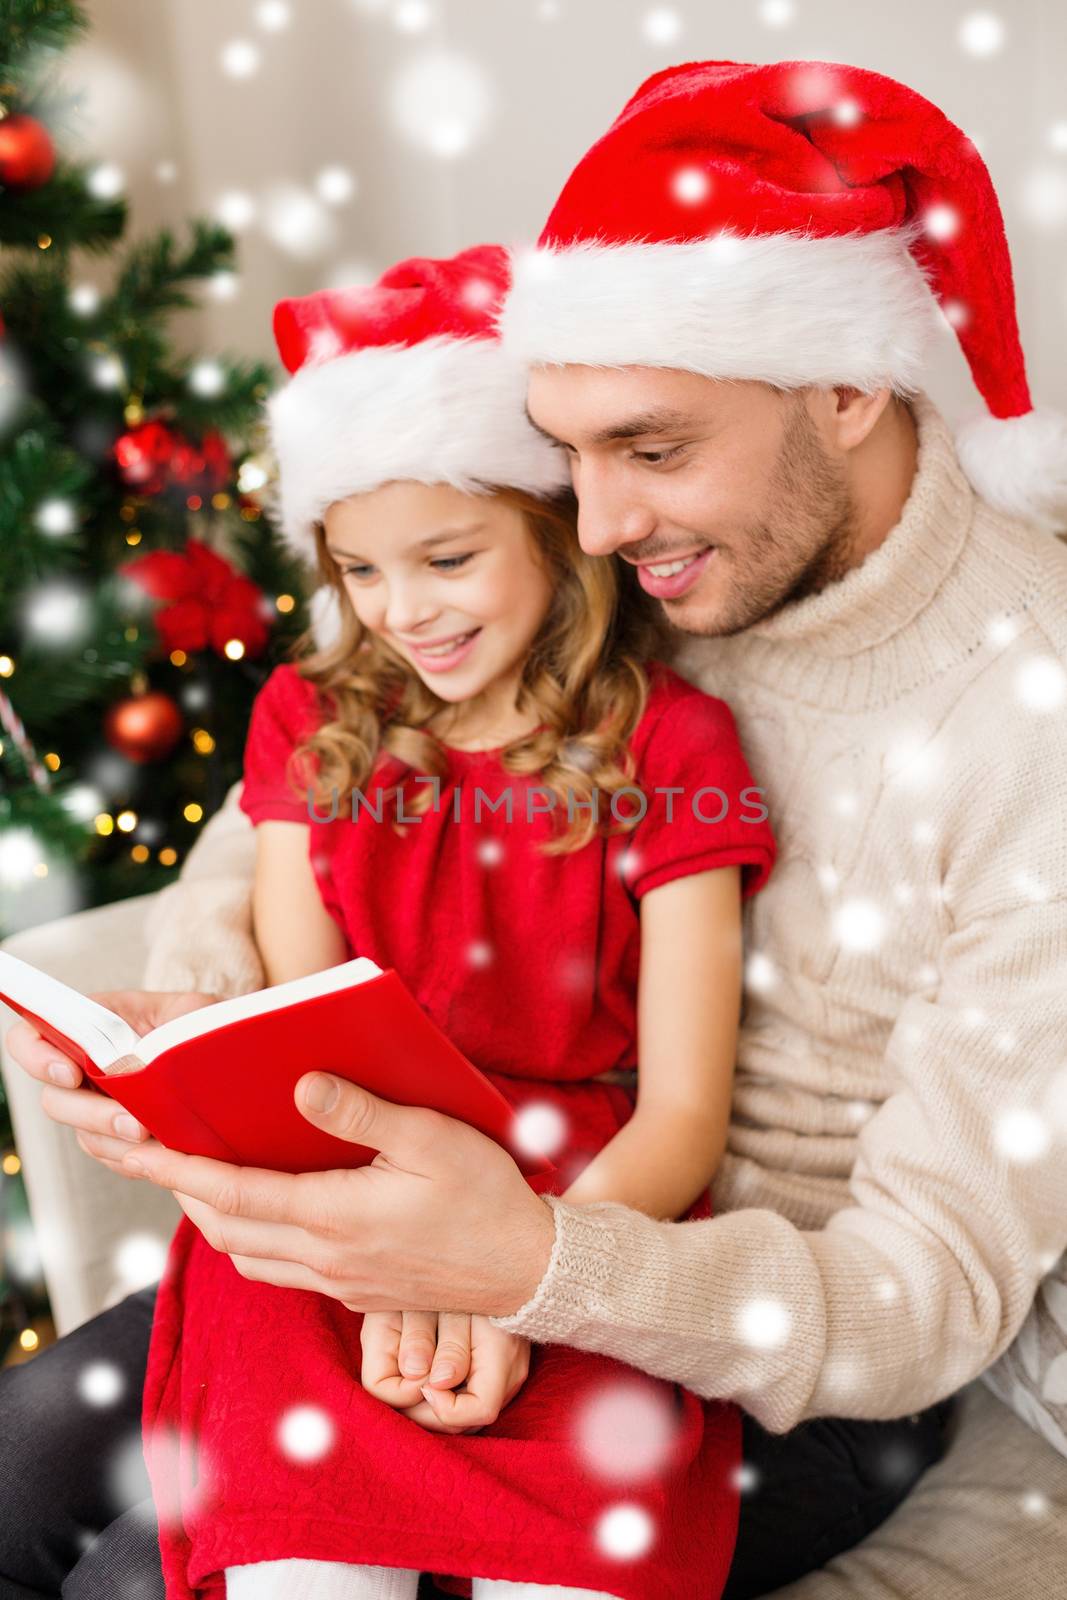 family, christmas, people and holidays concept - smiling father and girl in santa hats reading book or bible at home